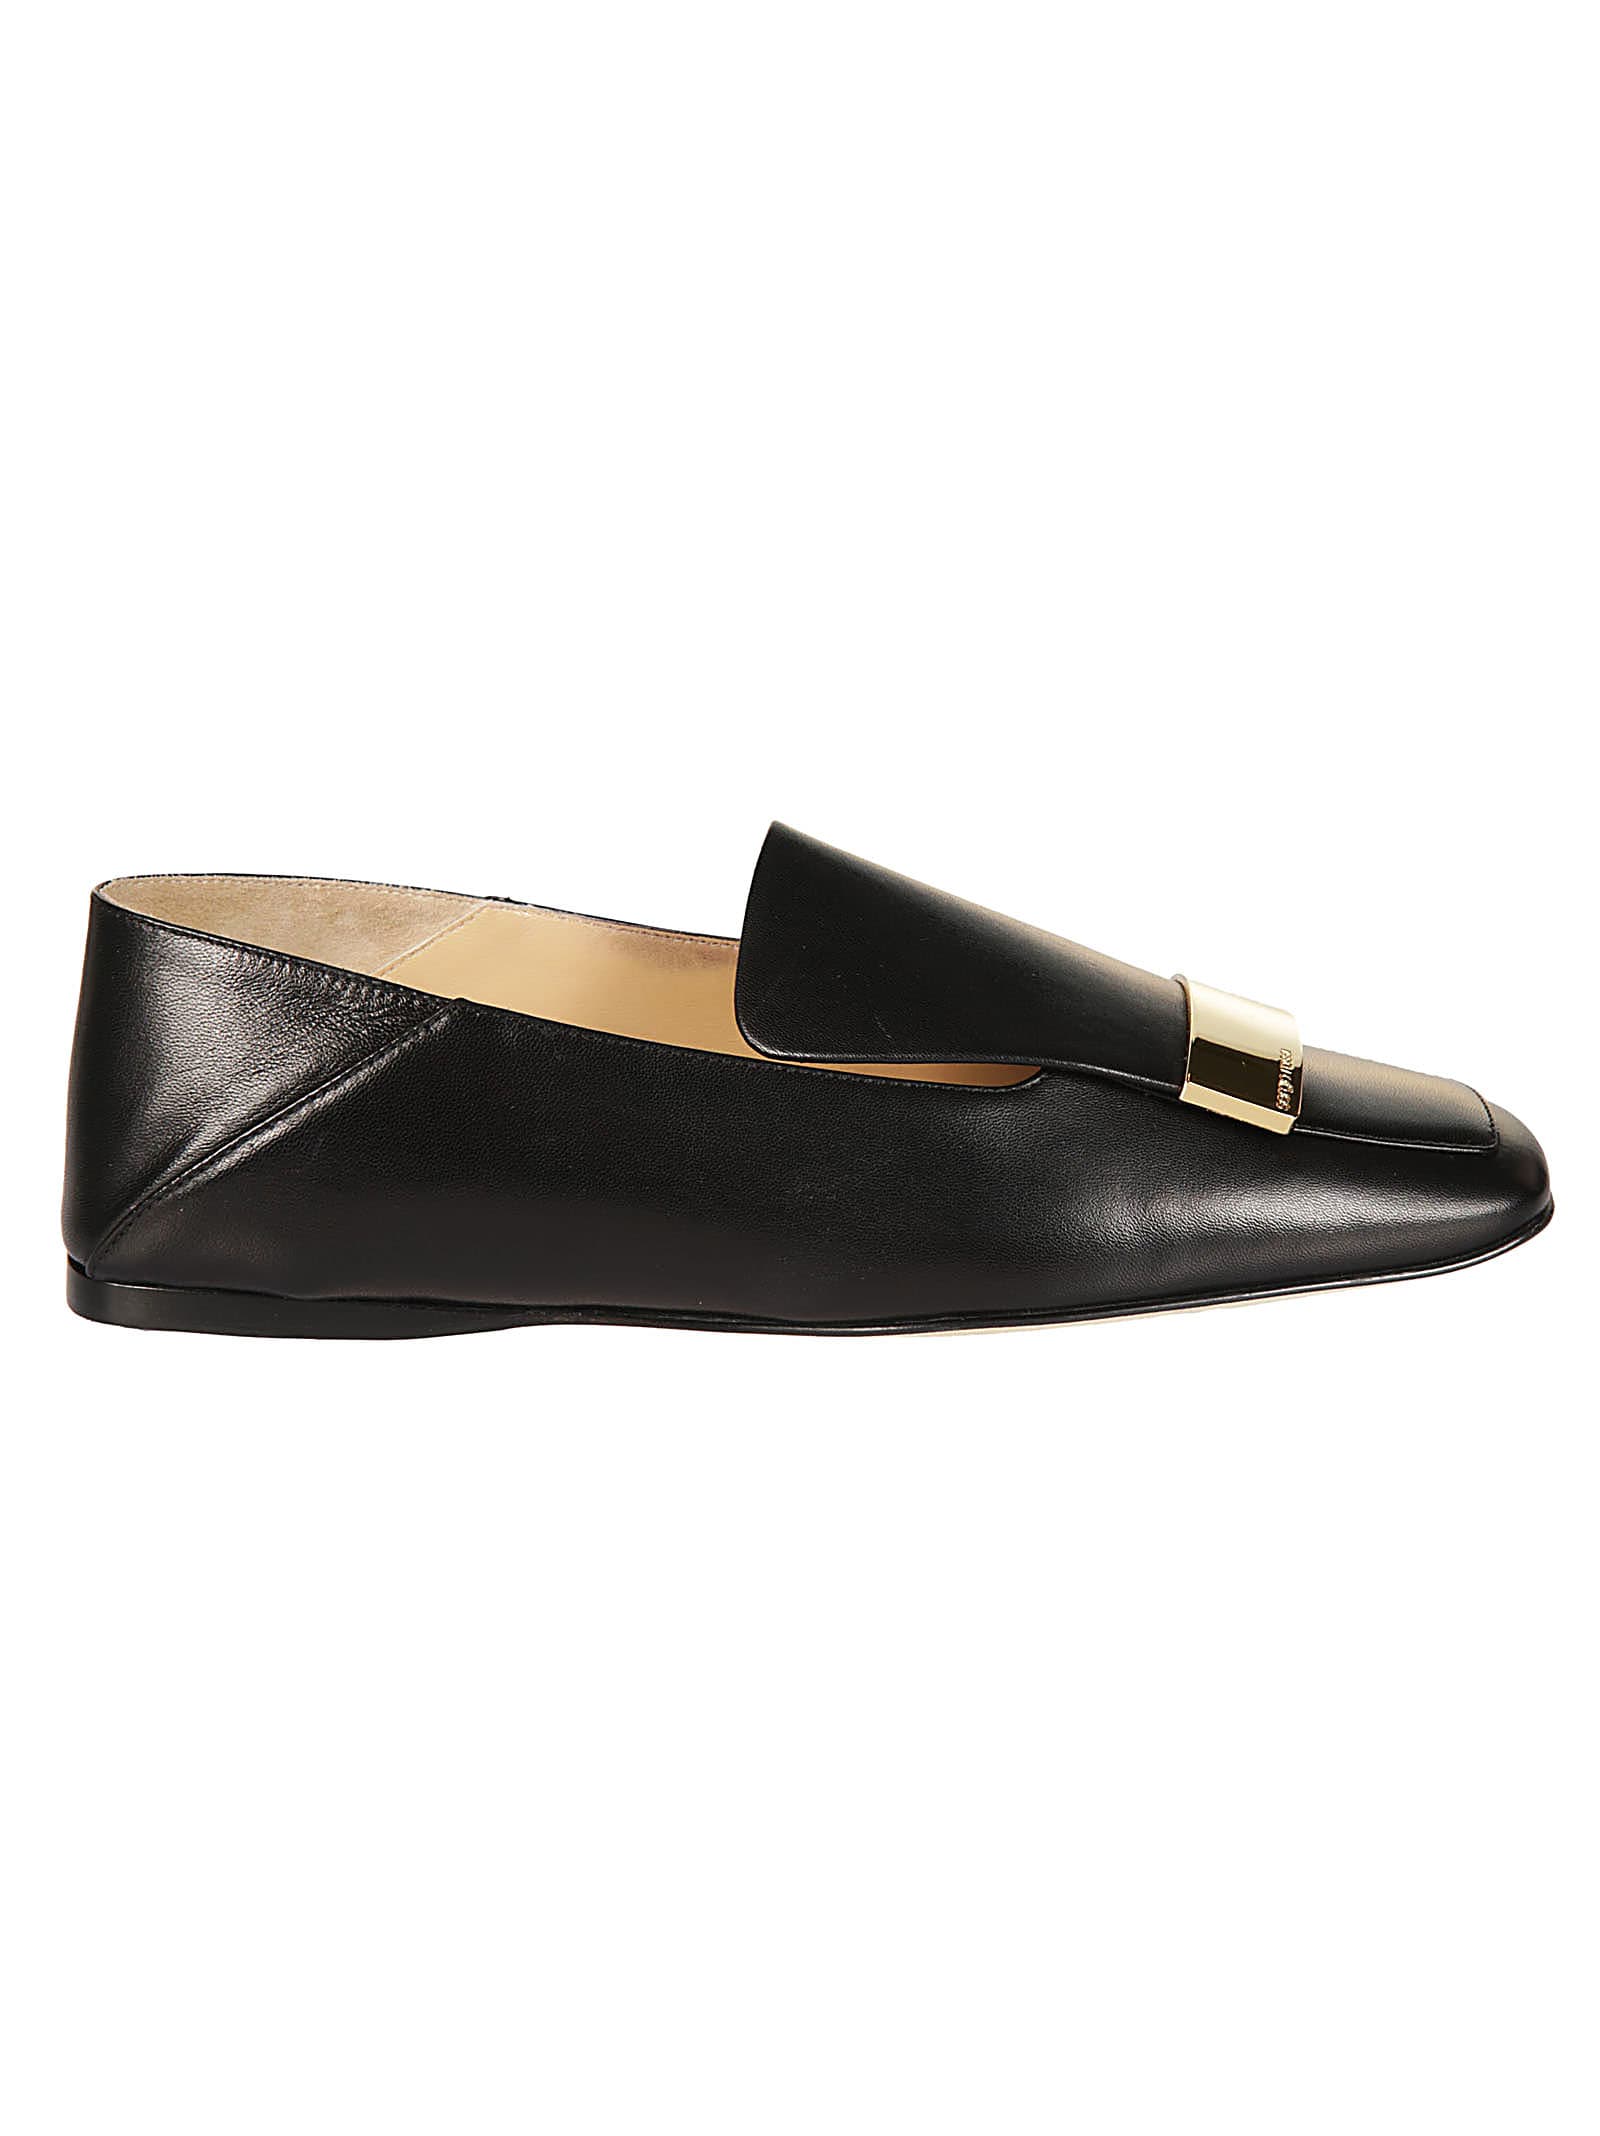 Buy Sergio Rossi Flat Loafers Sr1 online, shop Sergio Rossi shoes with free shipping